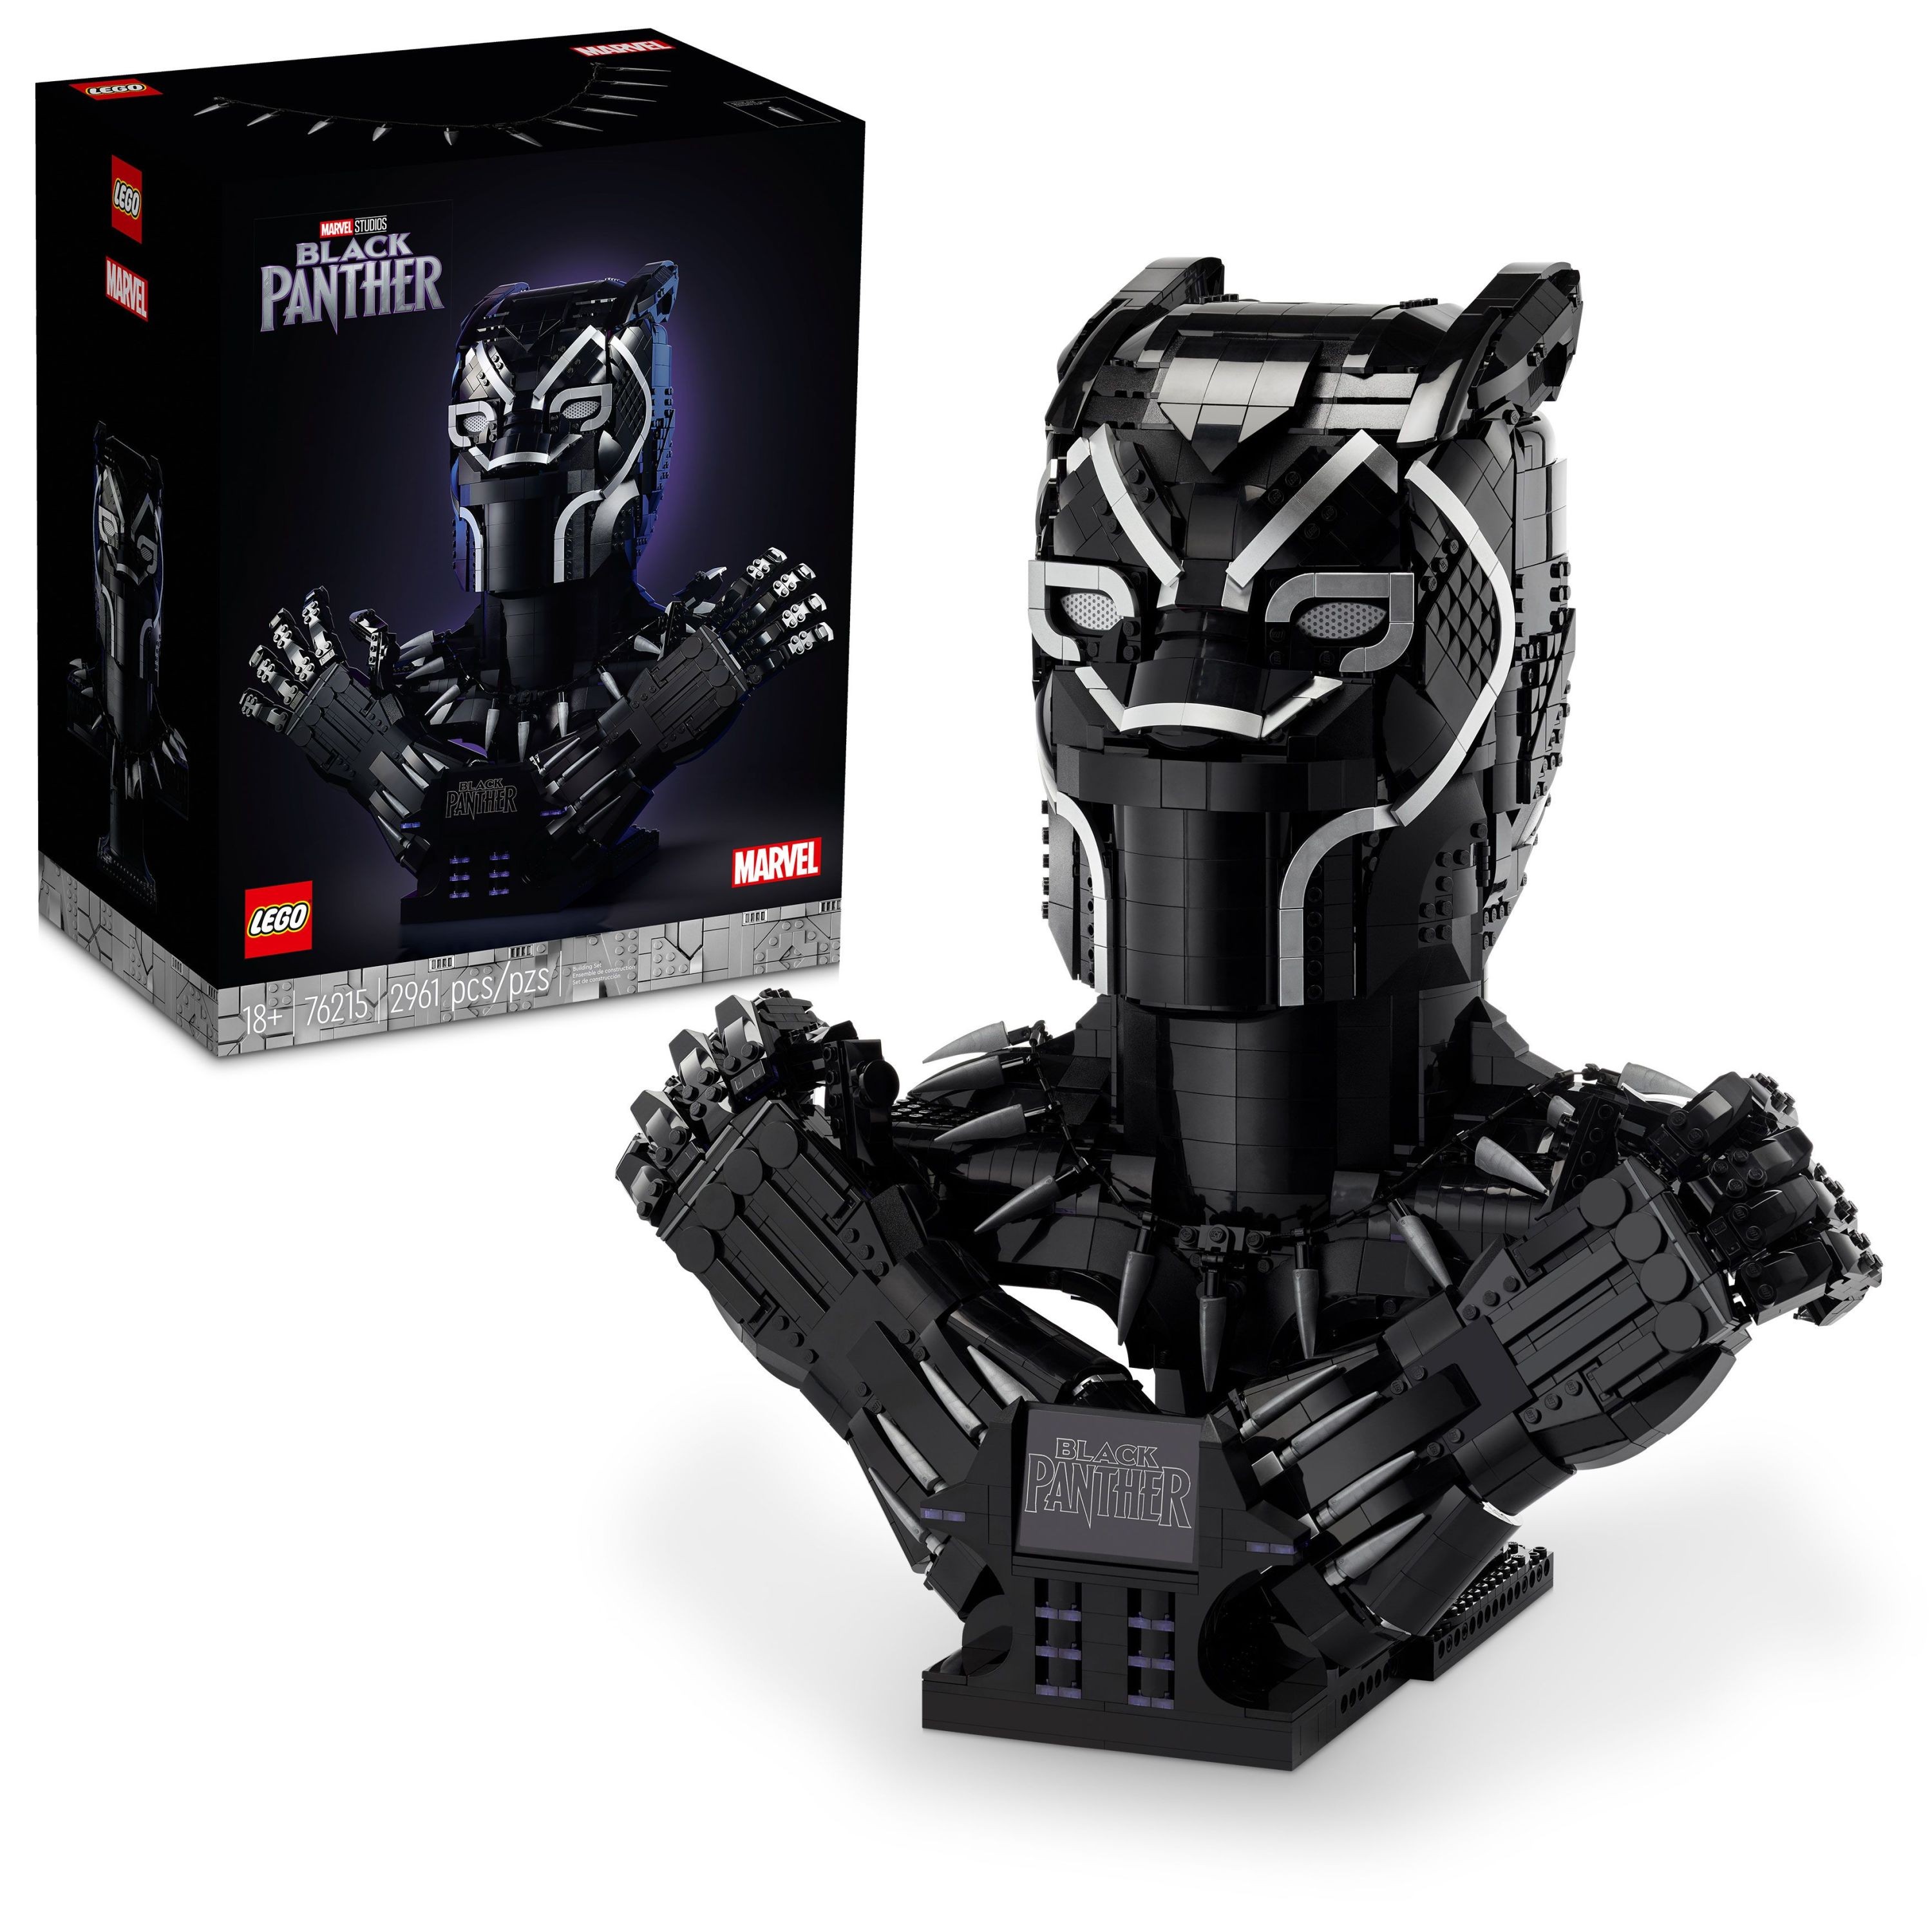 LEGO Black Panther 76215 (2,961 pieces) - $209.99 + free shipping @ lego.com (40% off)